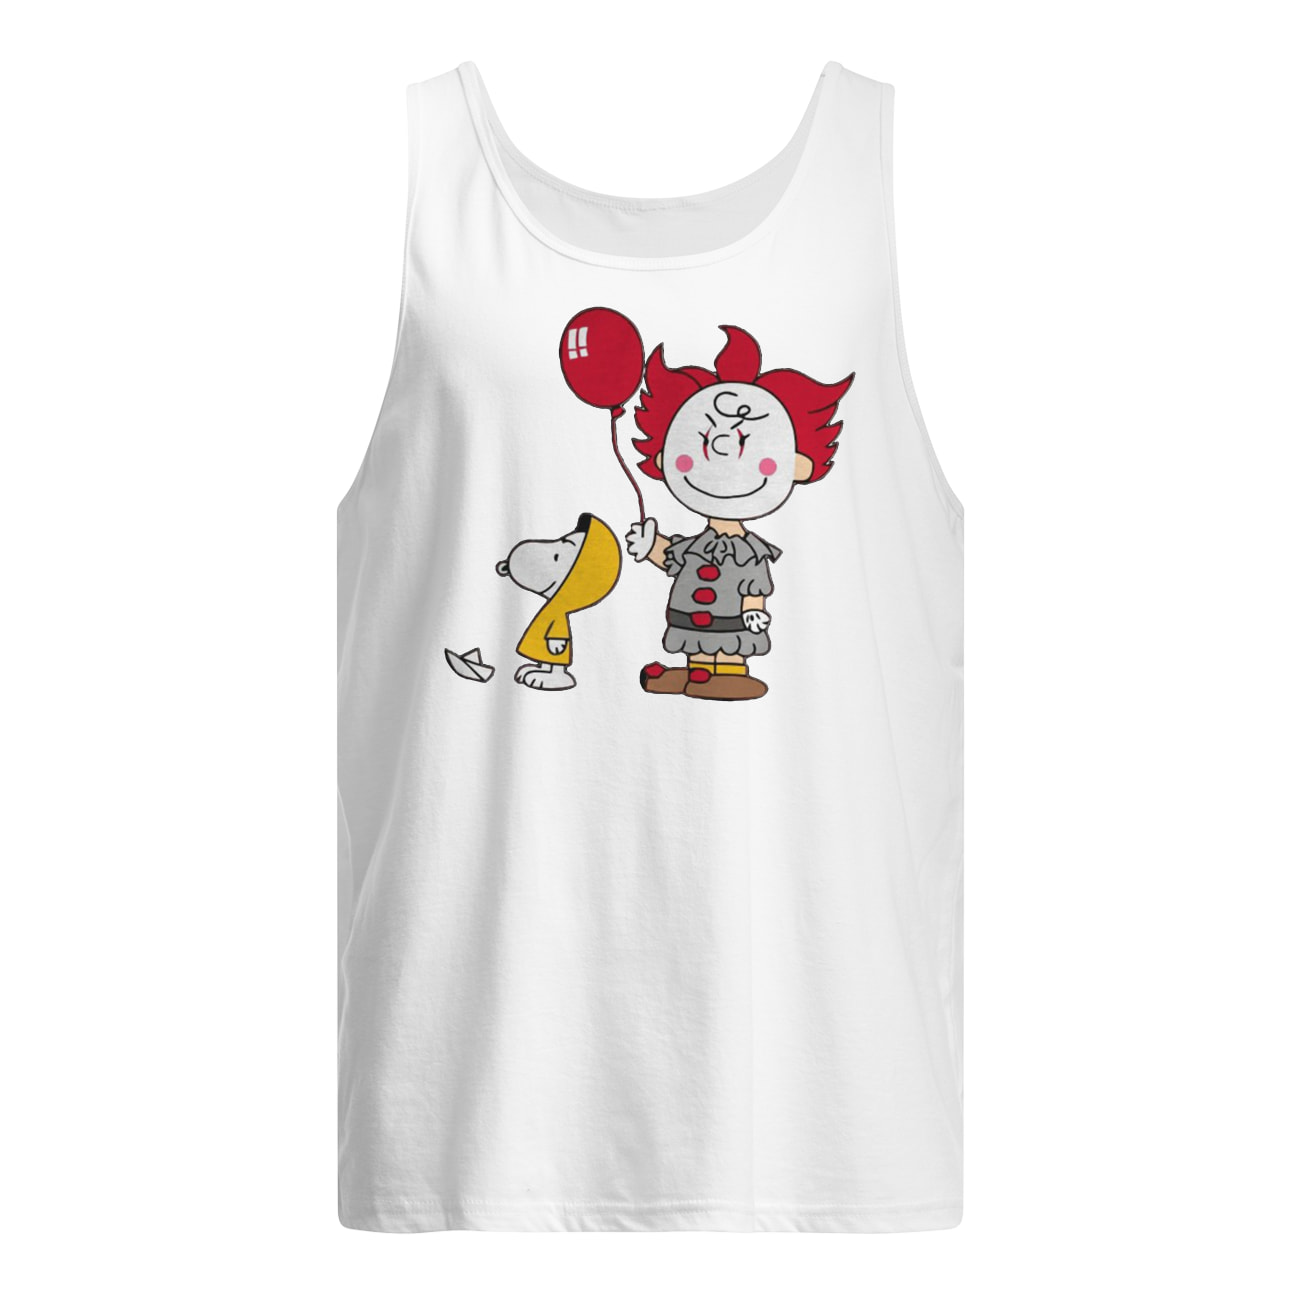 Chris brown and woodstock pennywise tank top